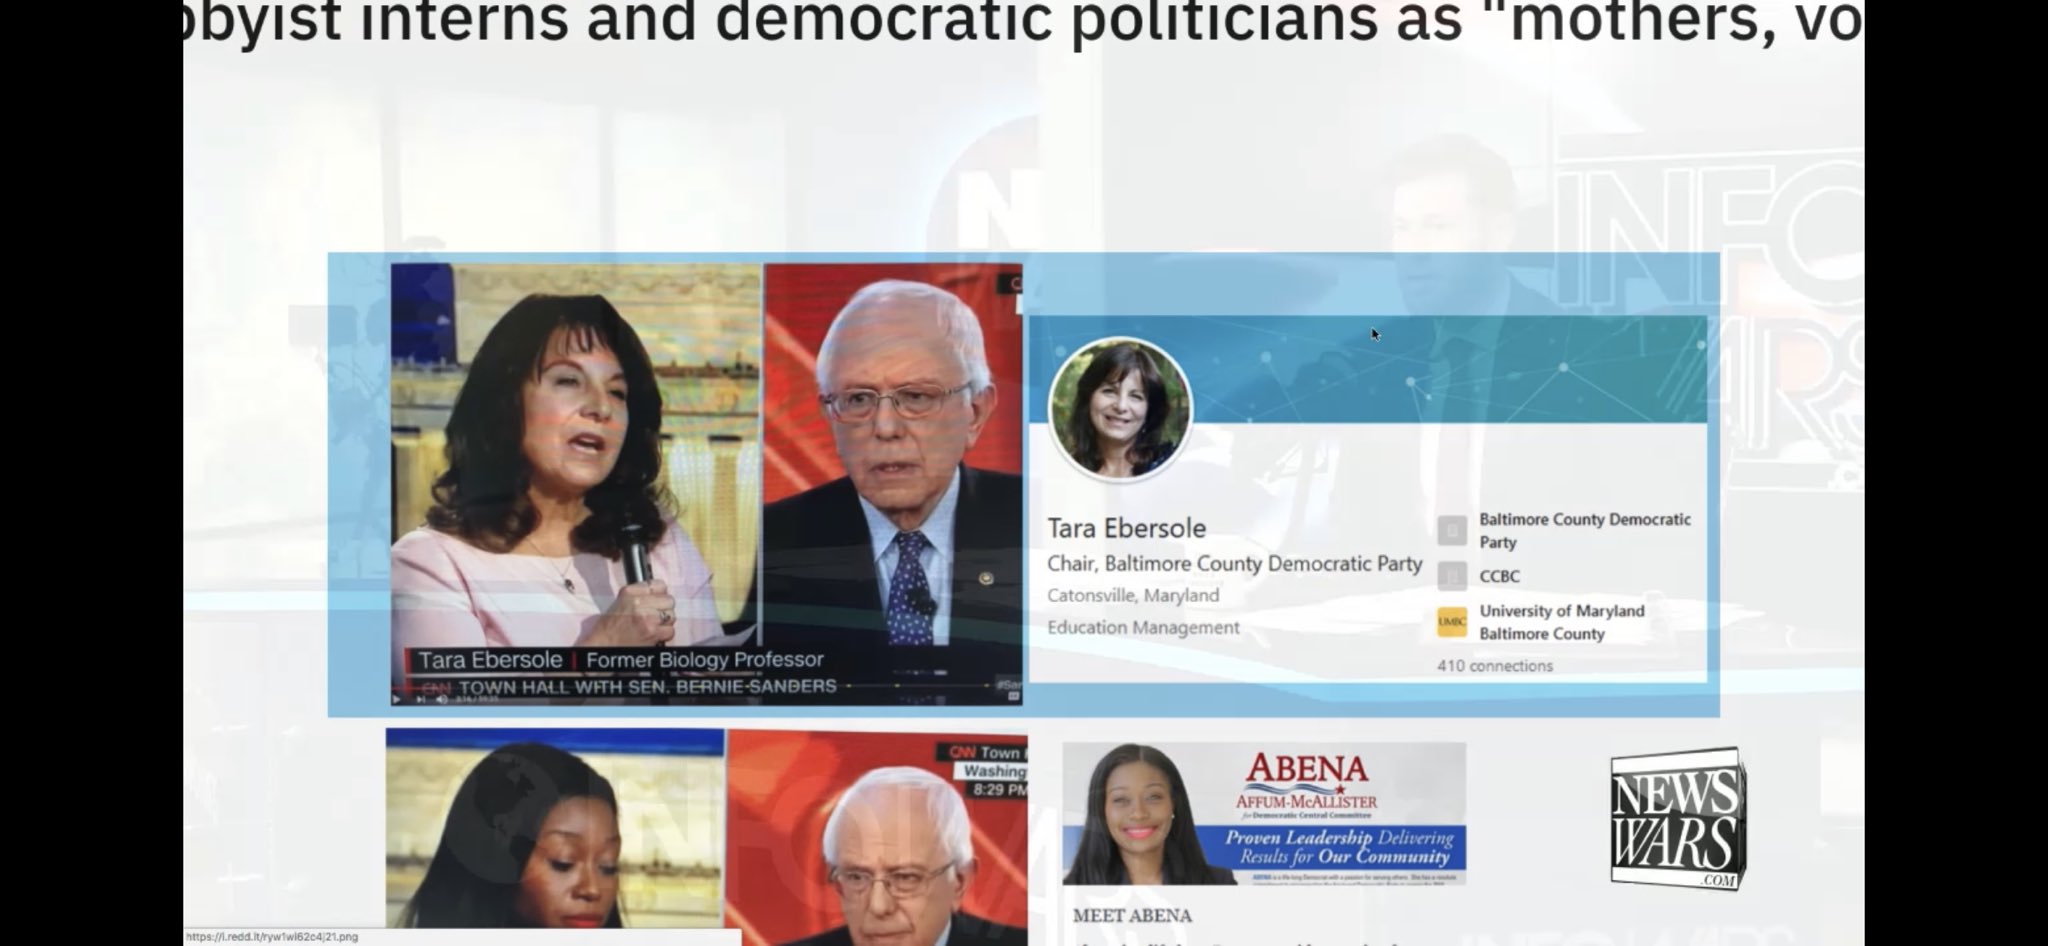 Melissa A. on Twitter: "Busted! CNN caught staging the @BernieSanders town hall. Every person that was selected to ask Bernie a question was a Democrat Party operative posing as regular citizens. This is why the media is called fake news. Thankfully only 23% of Americans (& declining) trust the media… https://t.co/BDNZFIuvYc"